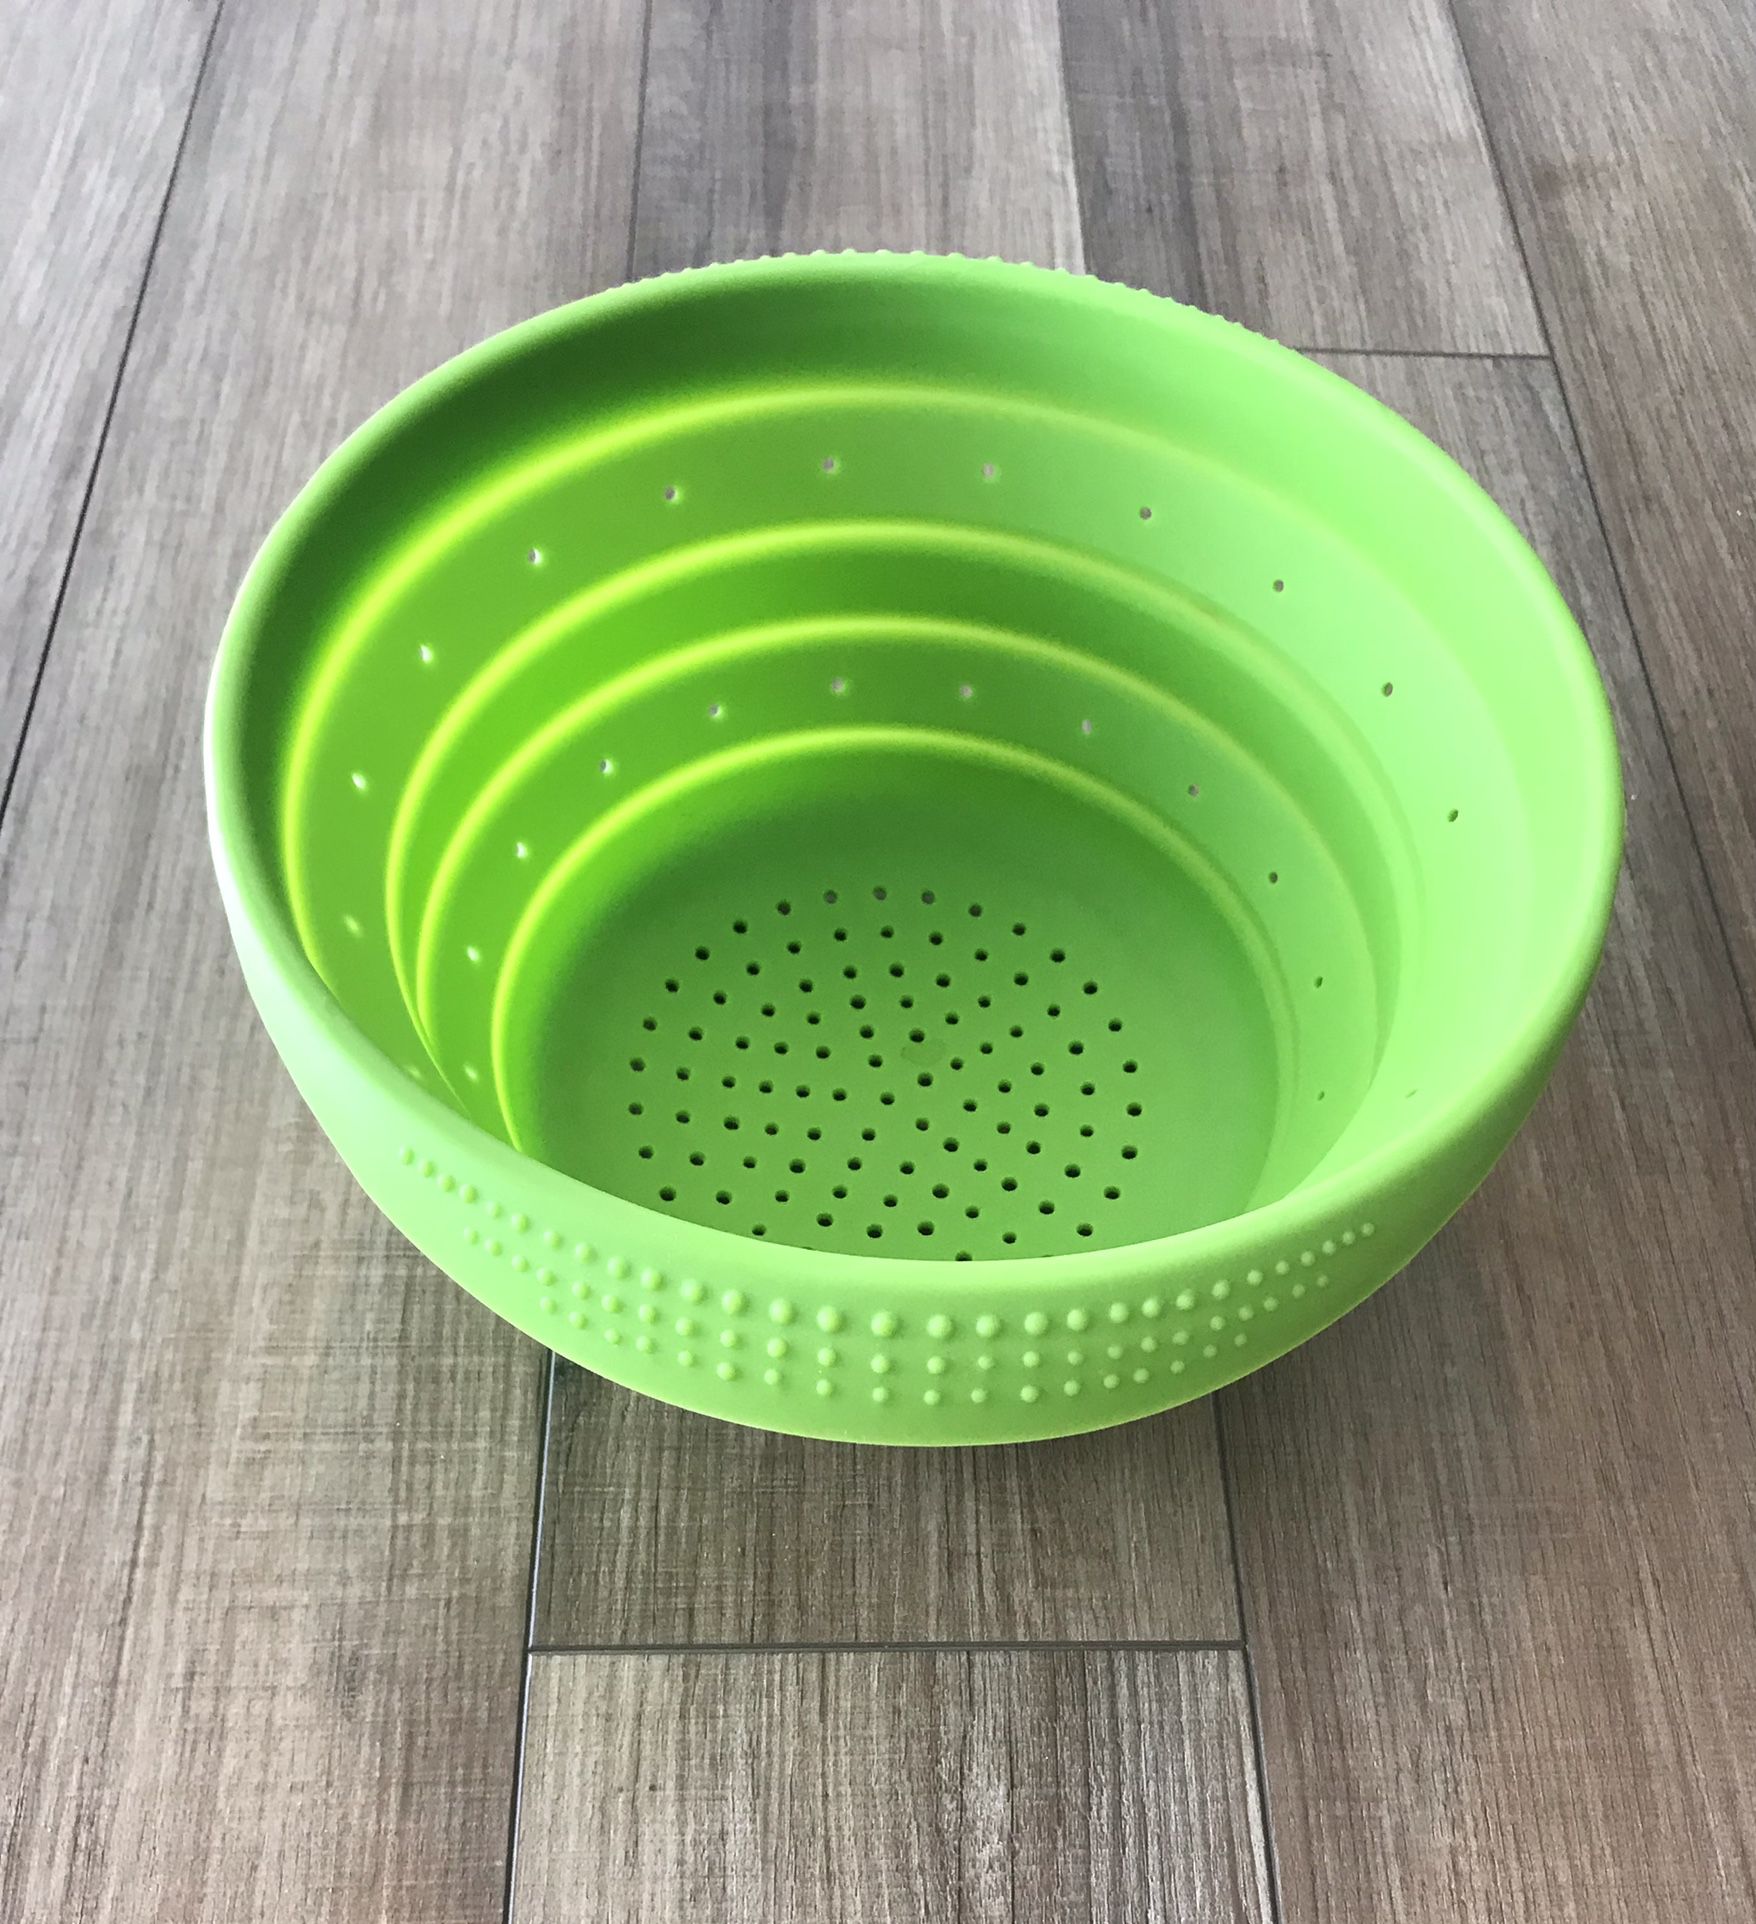 Better Houseware 4-Quart Silicone Collapsible Colander (Green) Multipurpose silicon strainer and colander, steamer insert, no boil over lid